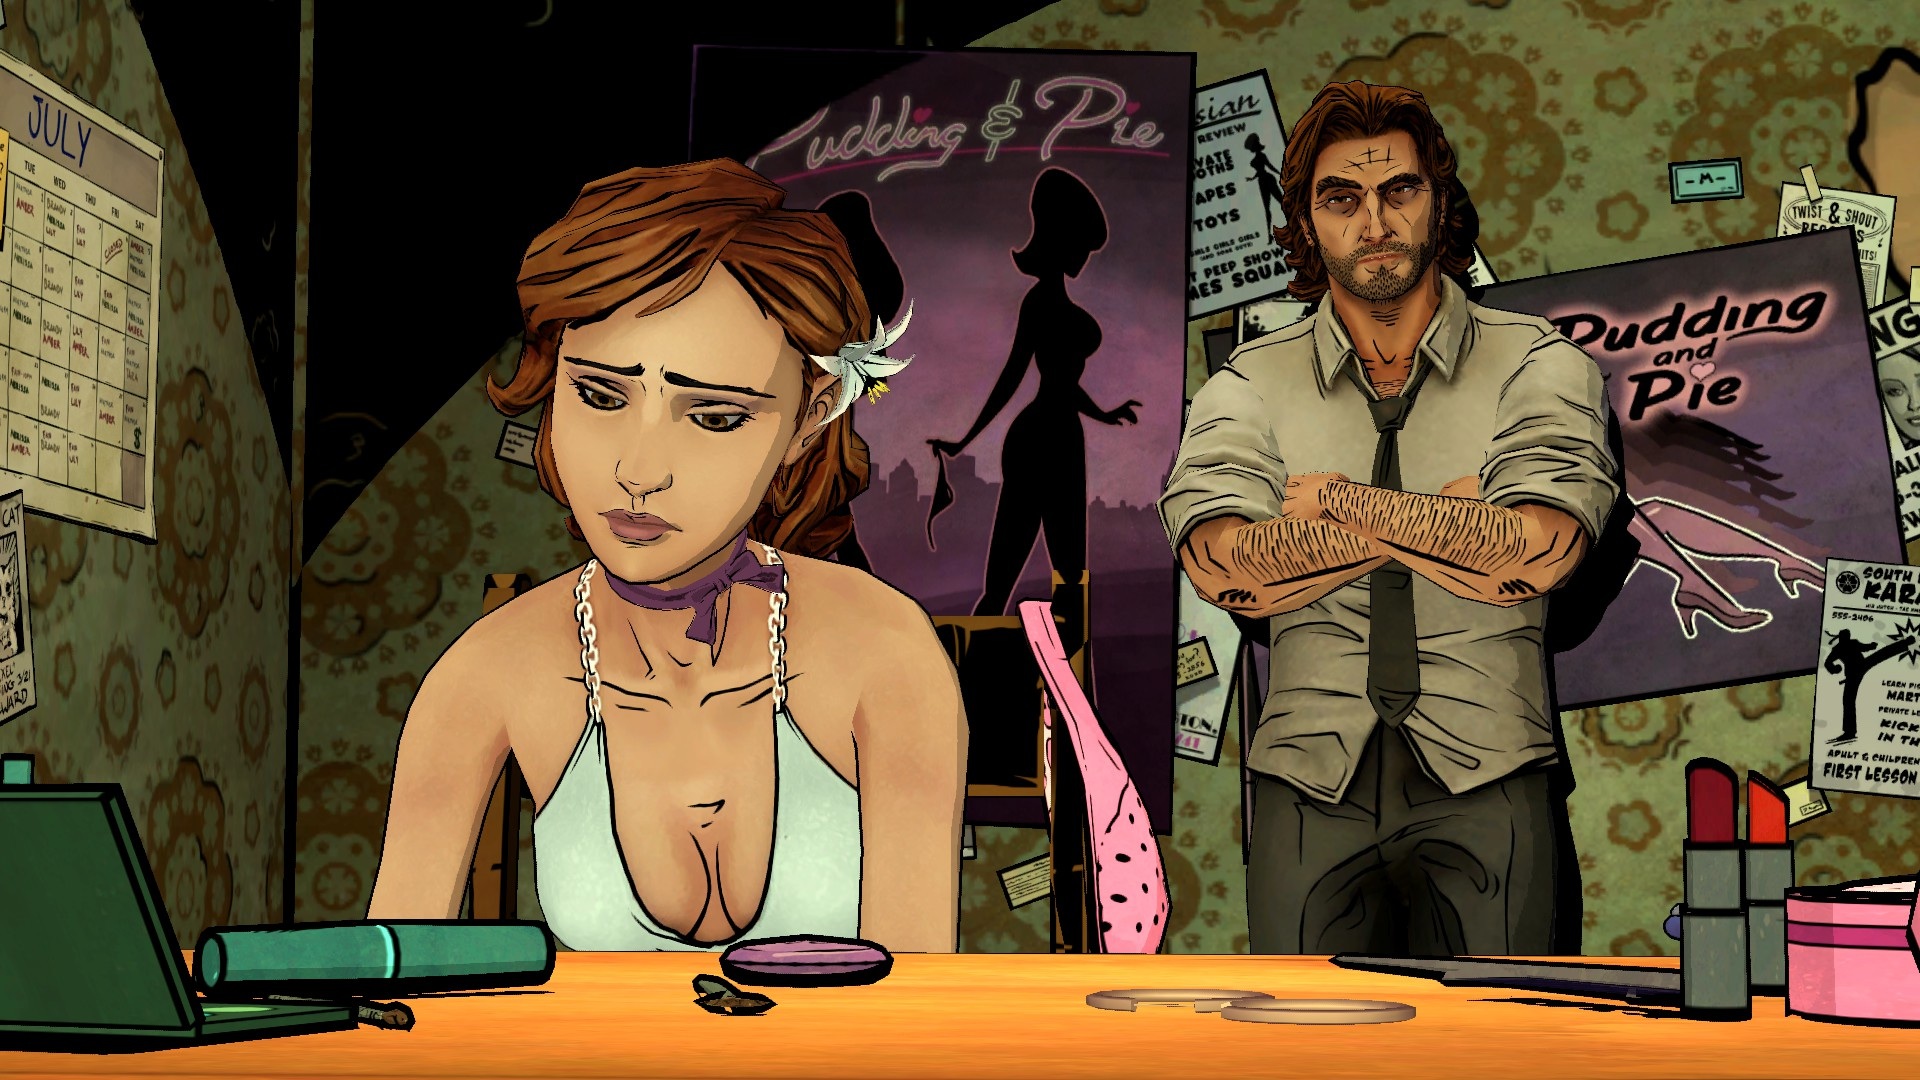 video game, the wolf among us, bigby wolf, the wolf amoug us